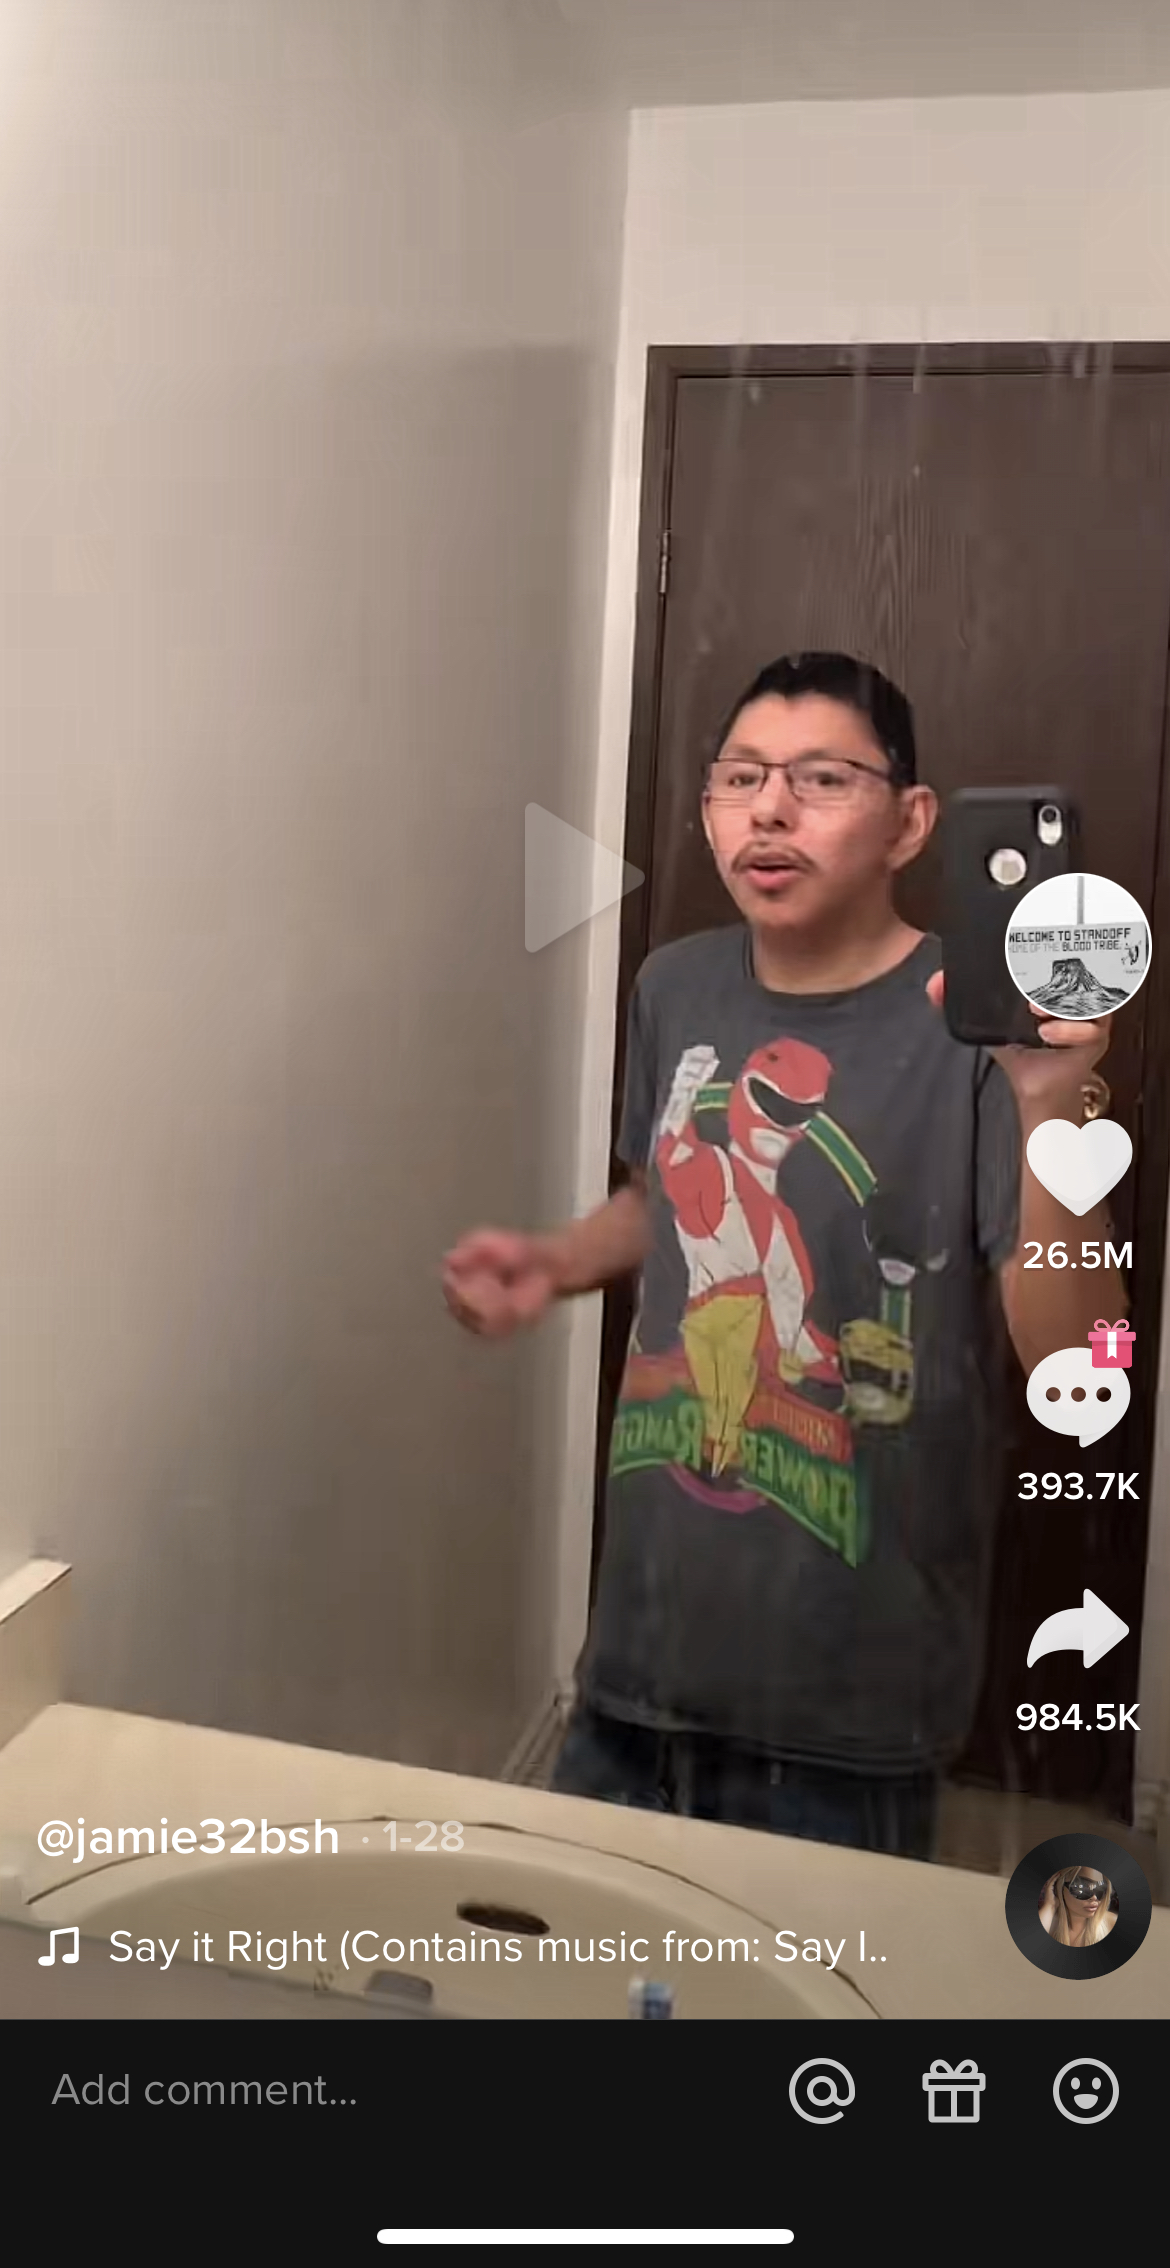 ‘Say It Right’ guy dancing in the bathroom goes viral